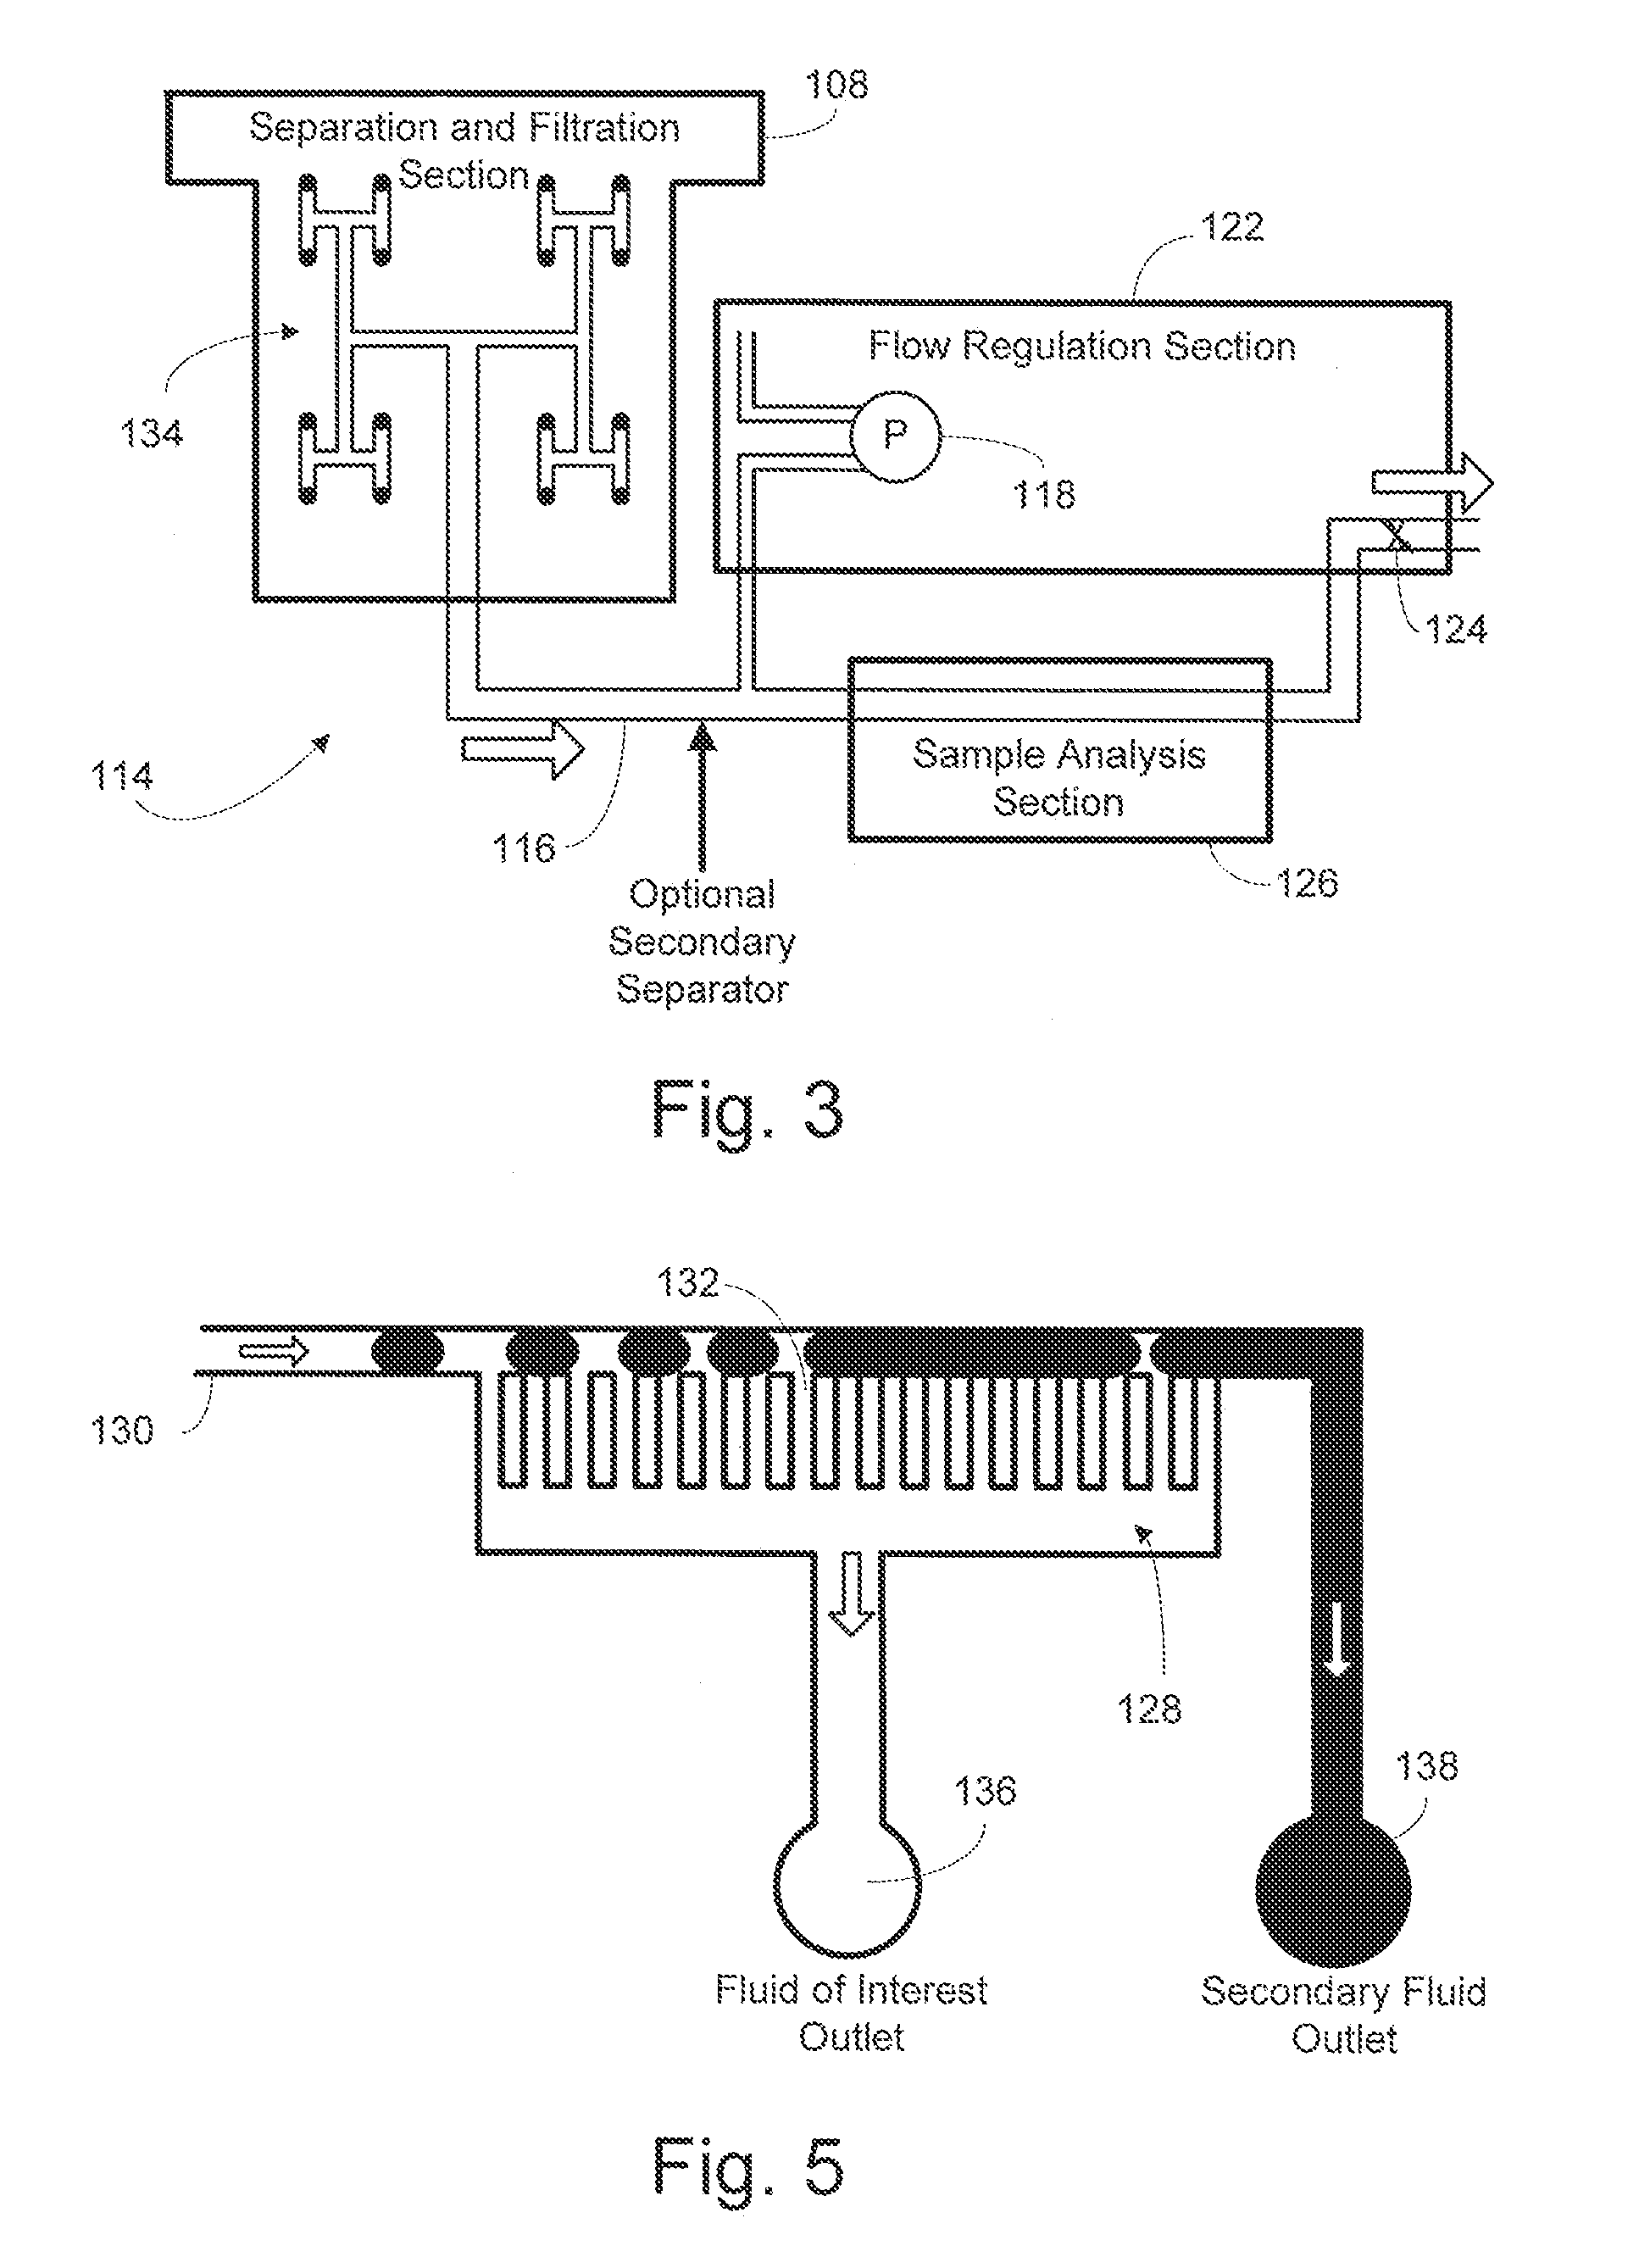 Methods and devices for minimizing membrane fouling for microfluidic separators